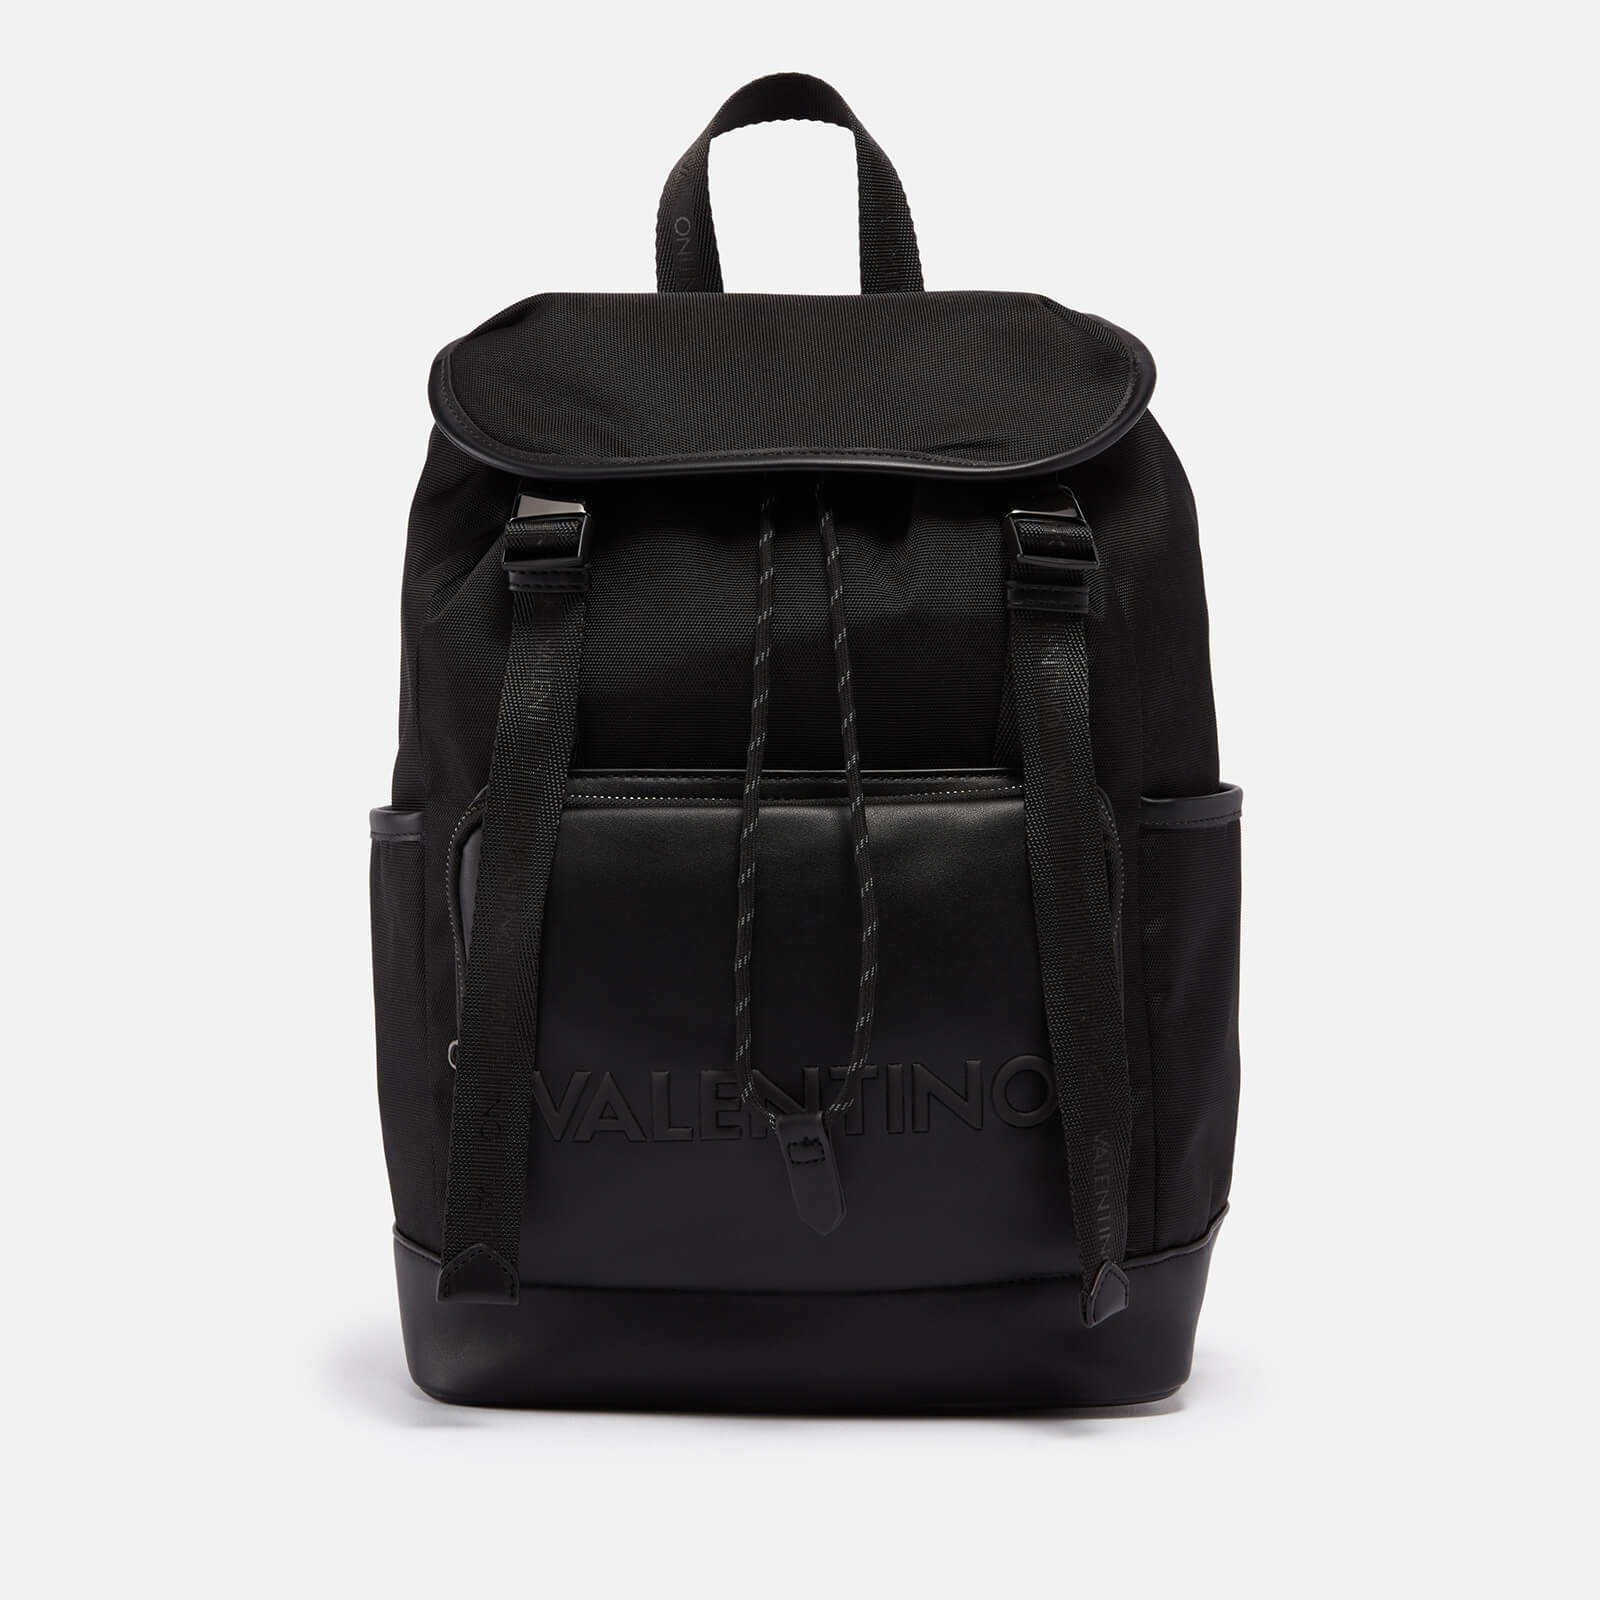 Valentino Cristian Canvas and Faux Leather Backpack